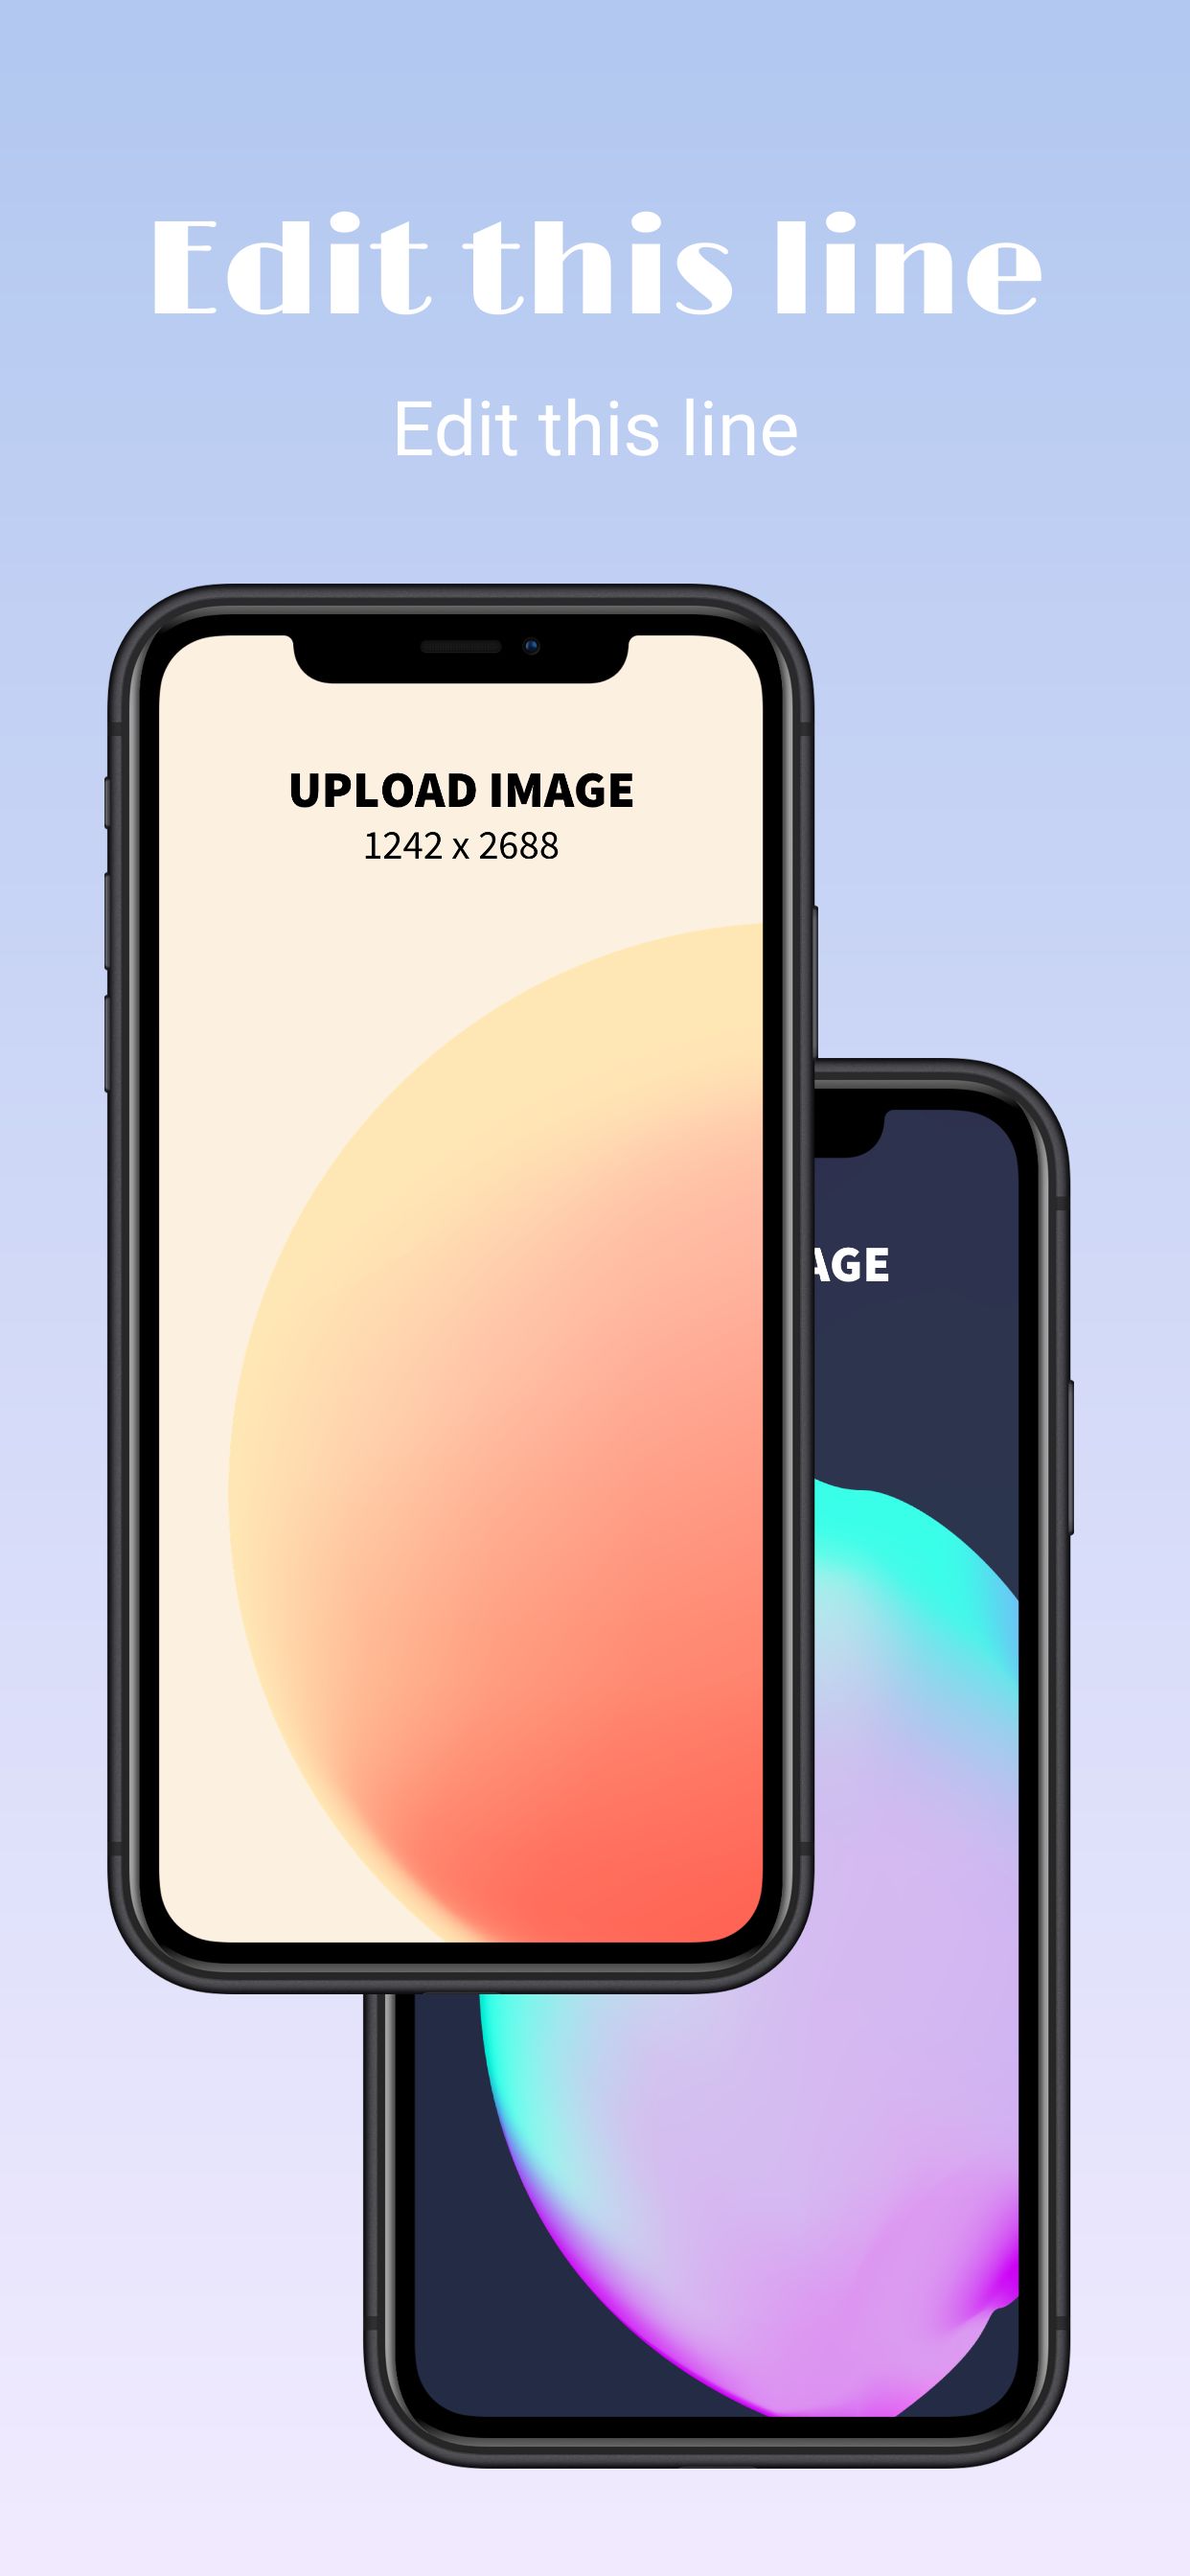 iPhone XS Max Screenshot 8 template. Quickly edit text, colors, images, and more for free.